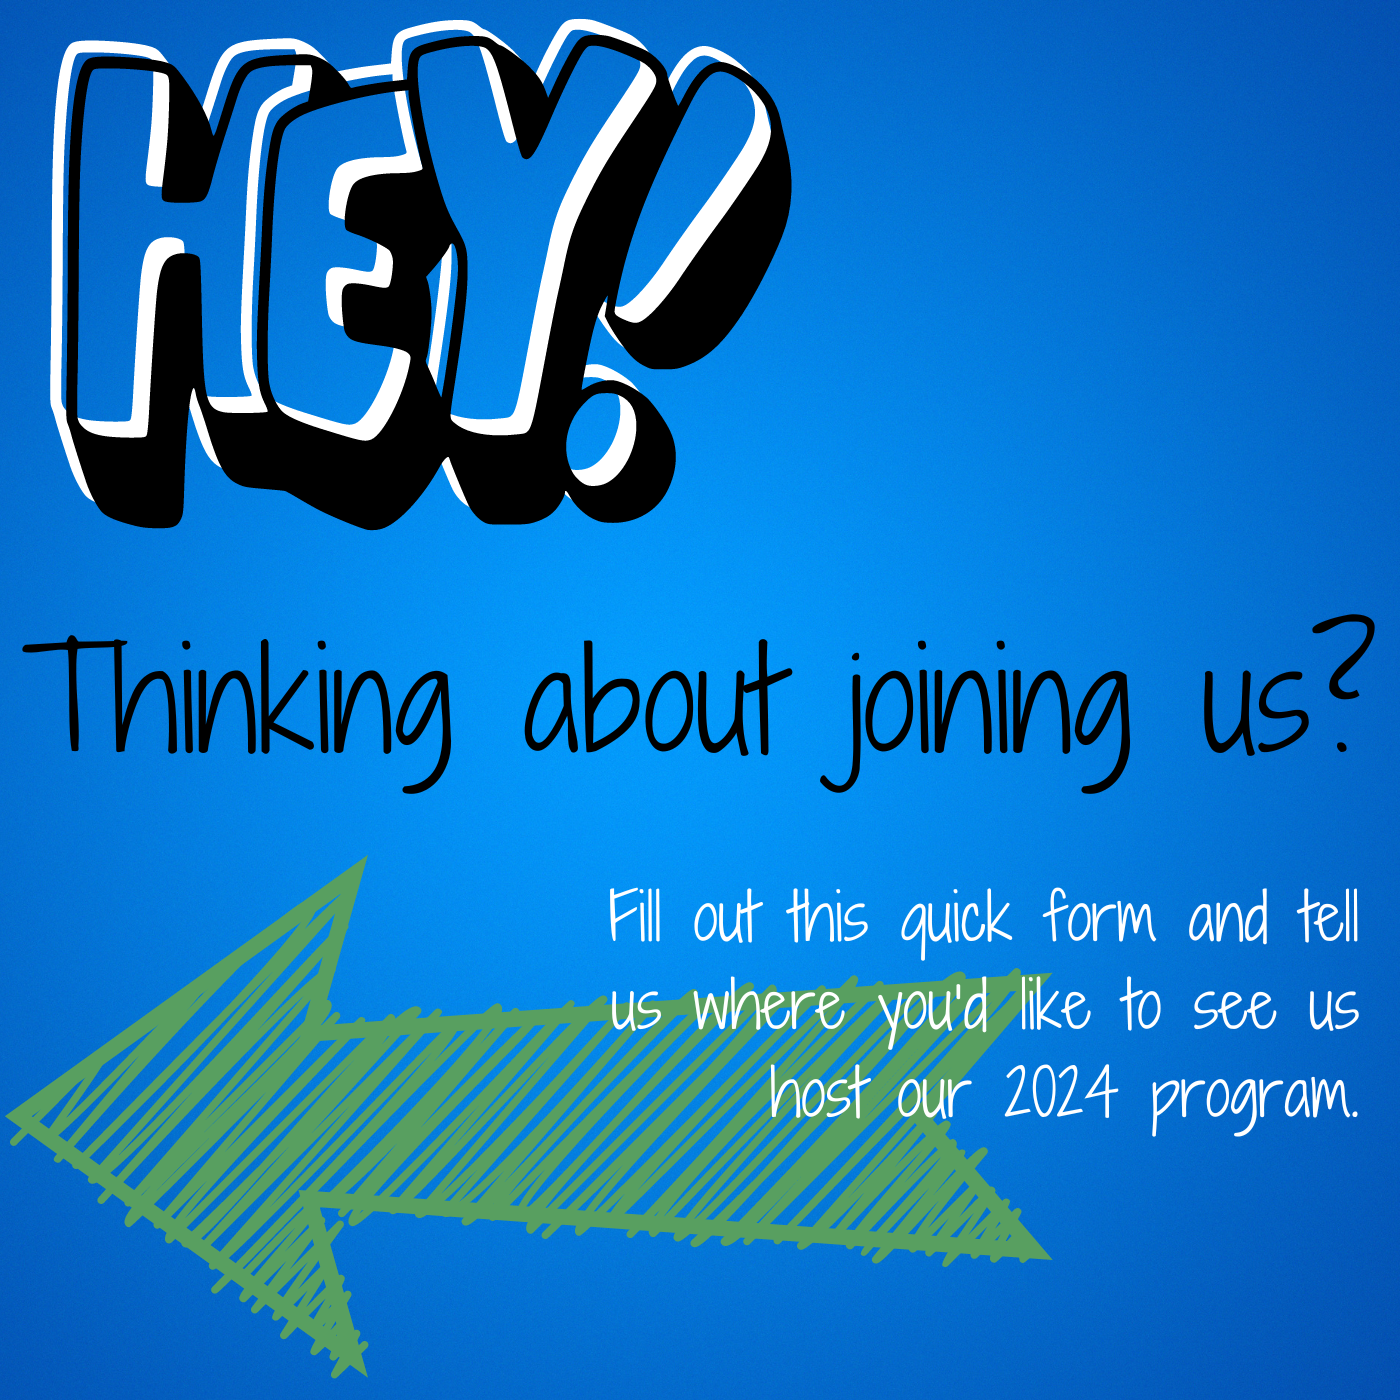 Hey! Thinking about joining us? Fill out this quick form and tell us where you'd like to see us host our 2024 program.